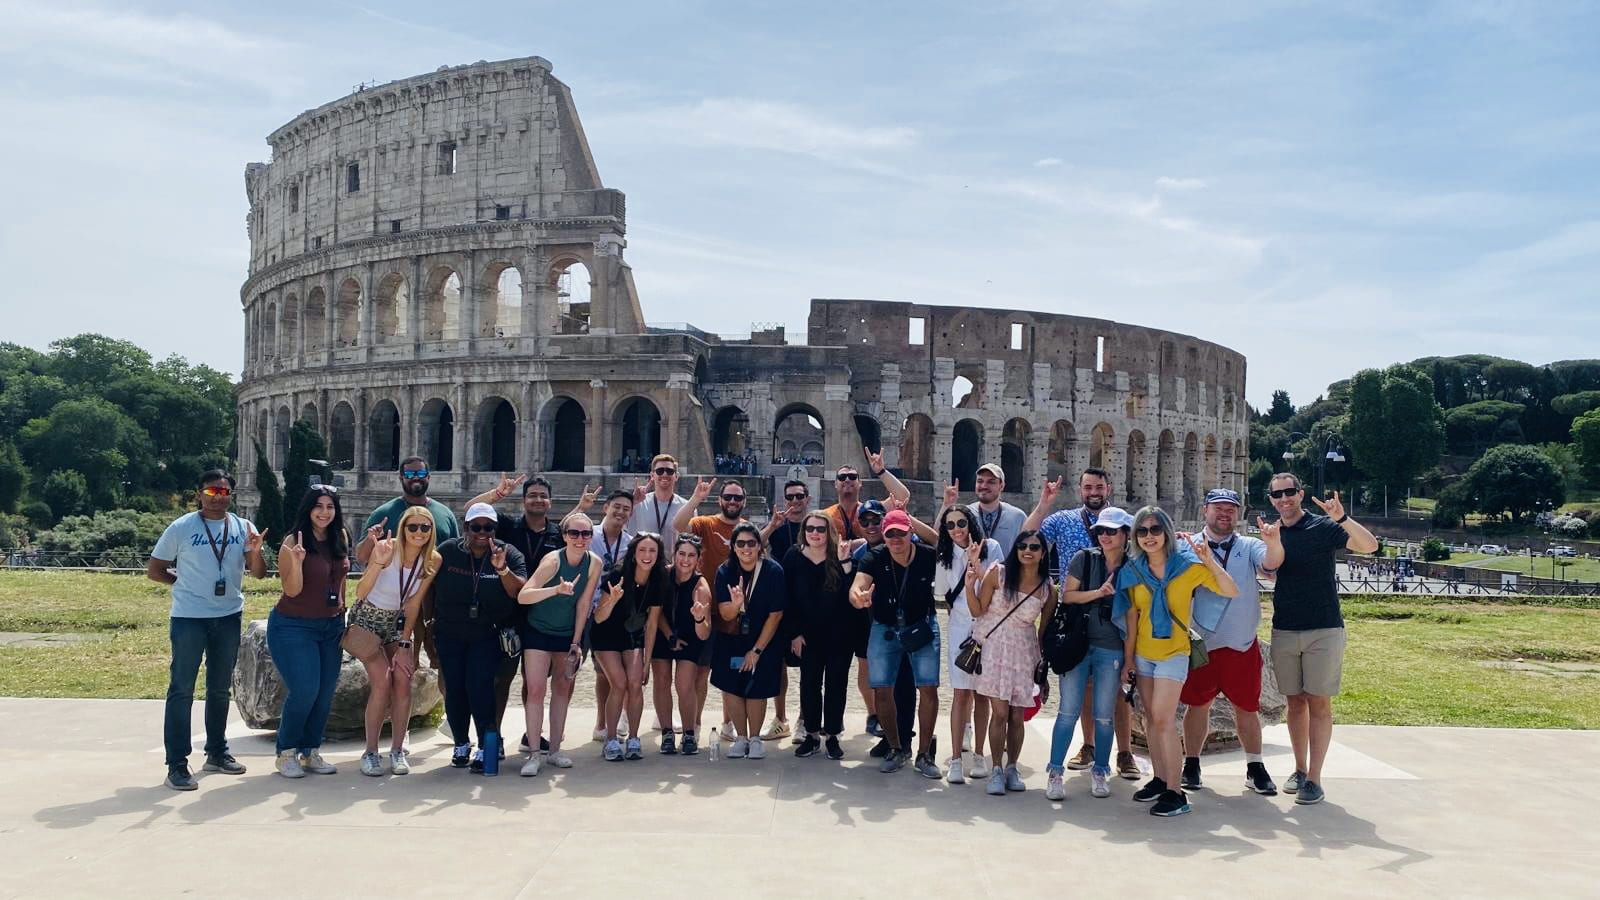 Veronica and other MBA students take a photo outside of the colosseum in Rome, Italy.